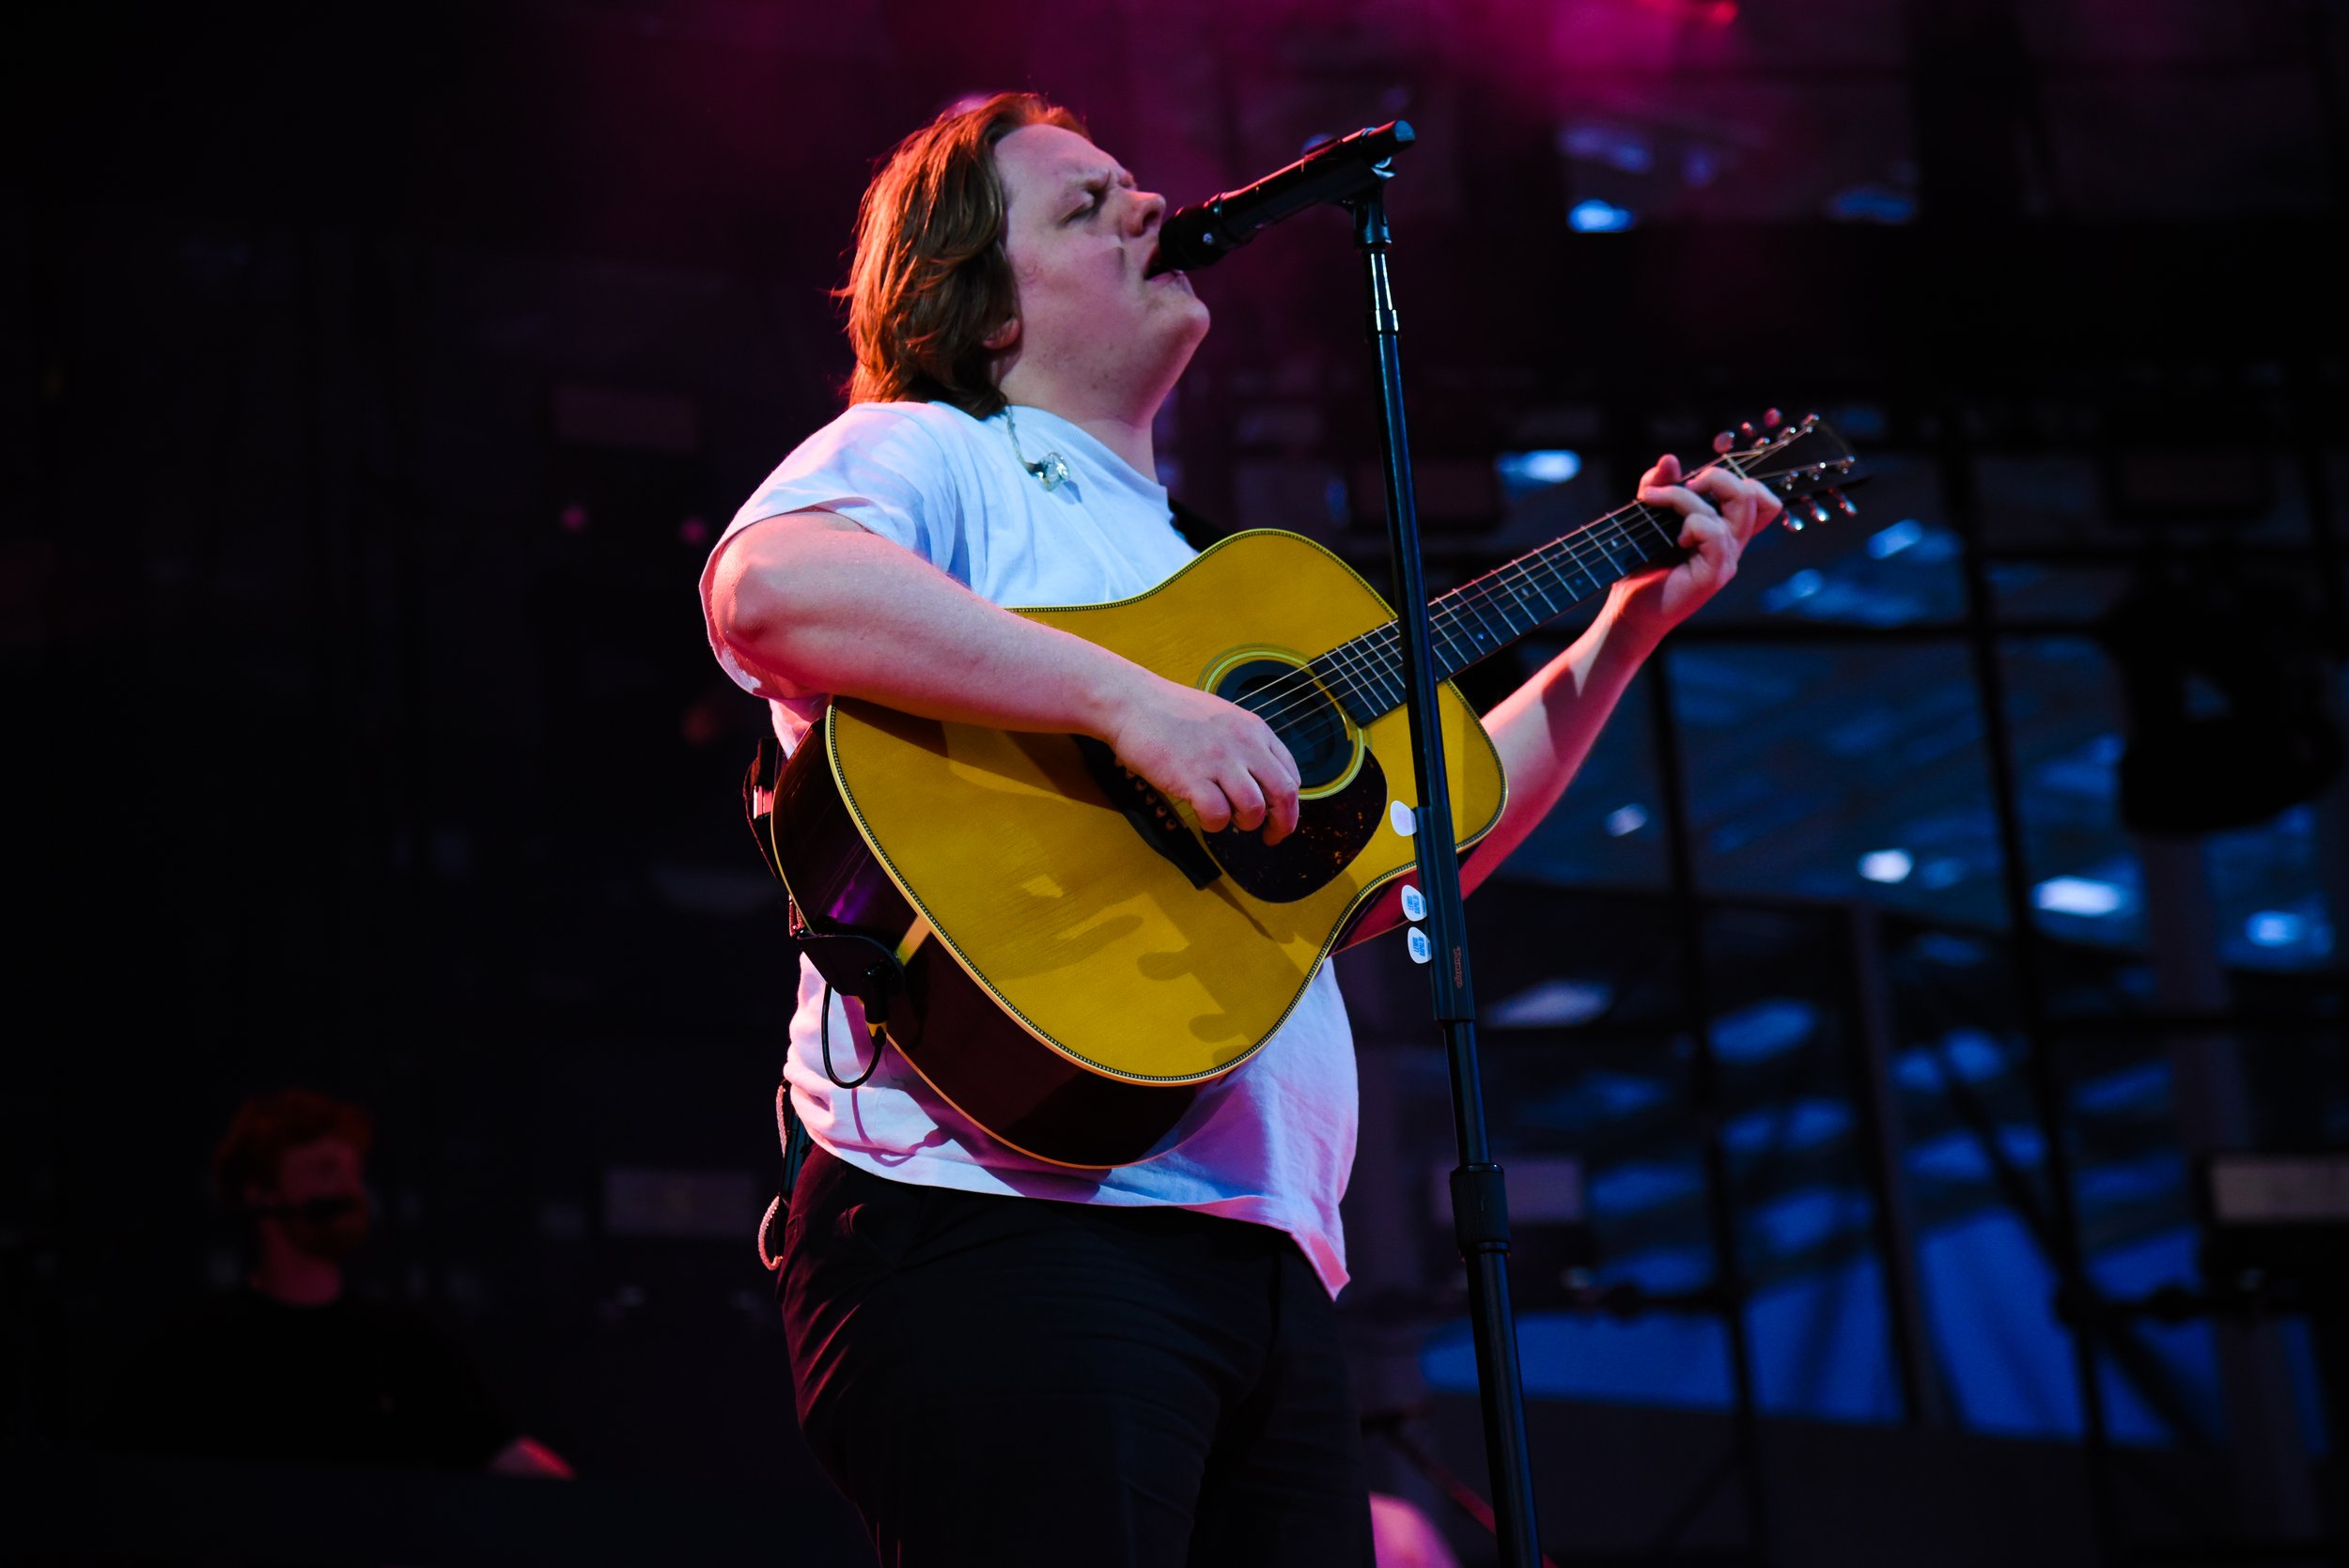  Lewis Capaldi performs the second song of his set, “Forever.” 